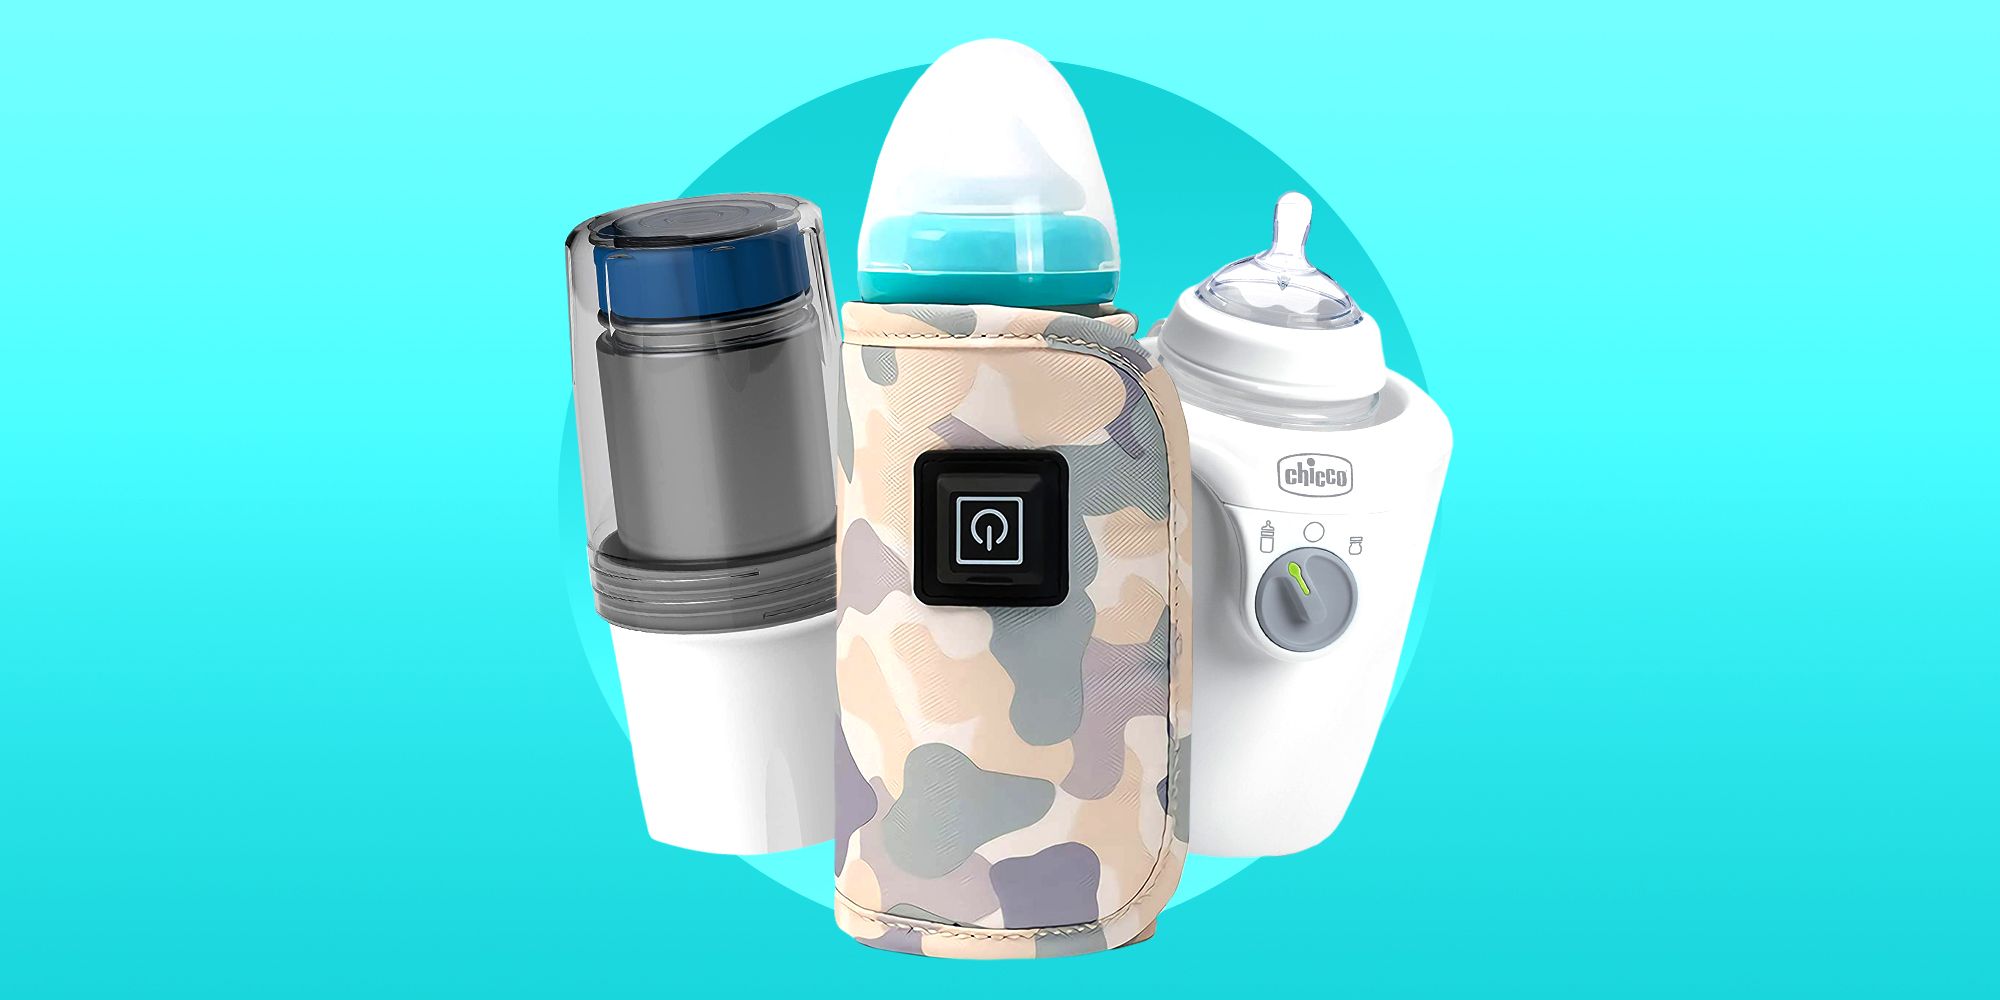 Baby Bottle Warmer USB Portable Travel Infant Baby Feeding Bottle Water Constant Temperature Milk Warmer Feeding Bottle Warmer Heater for Car Travel Long Trip